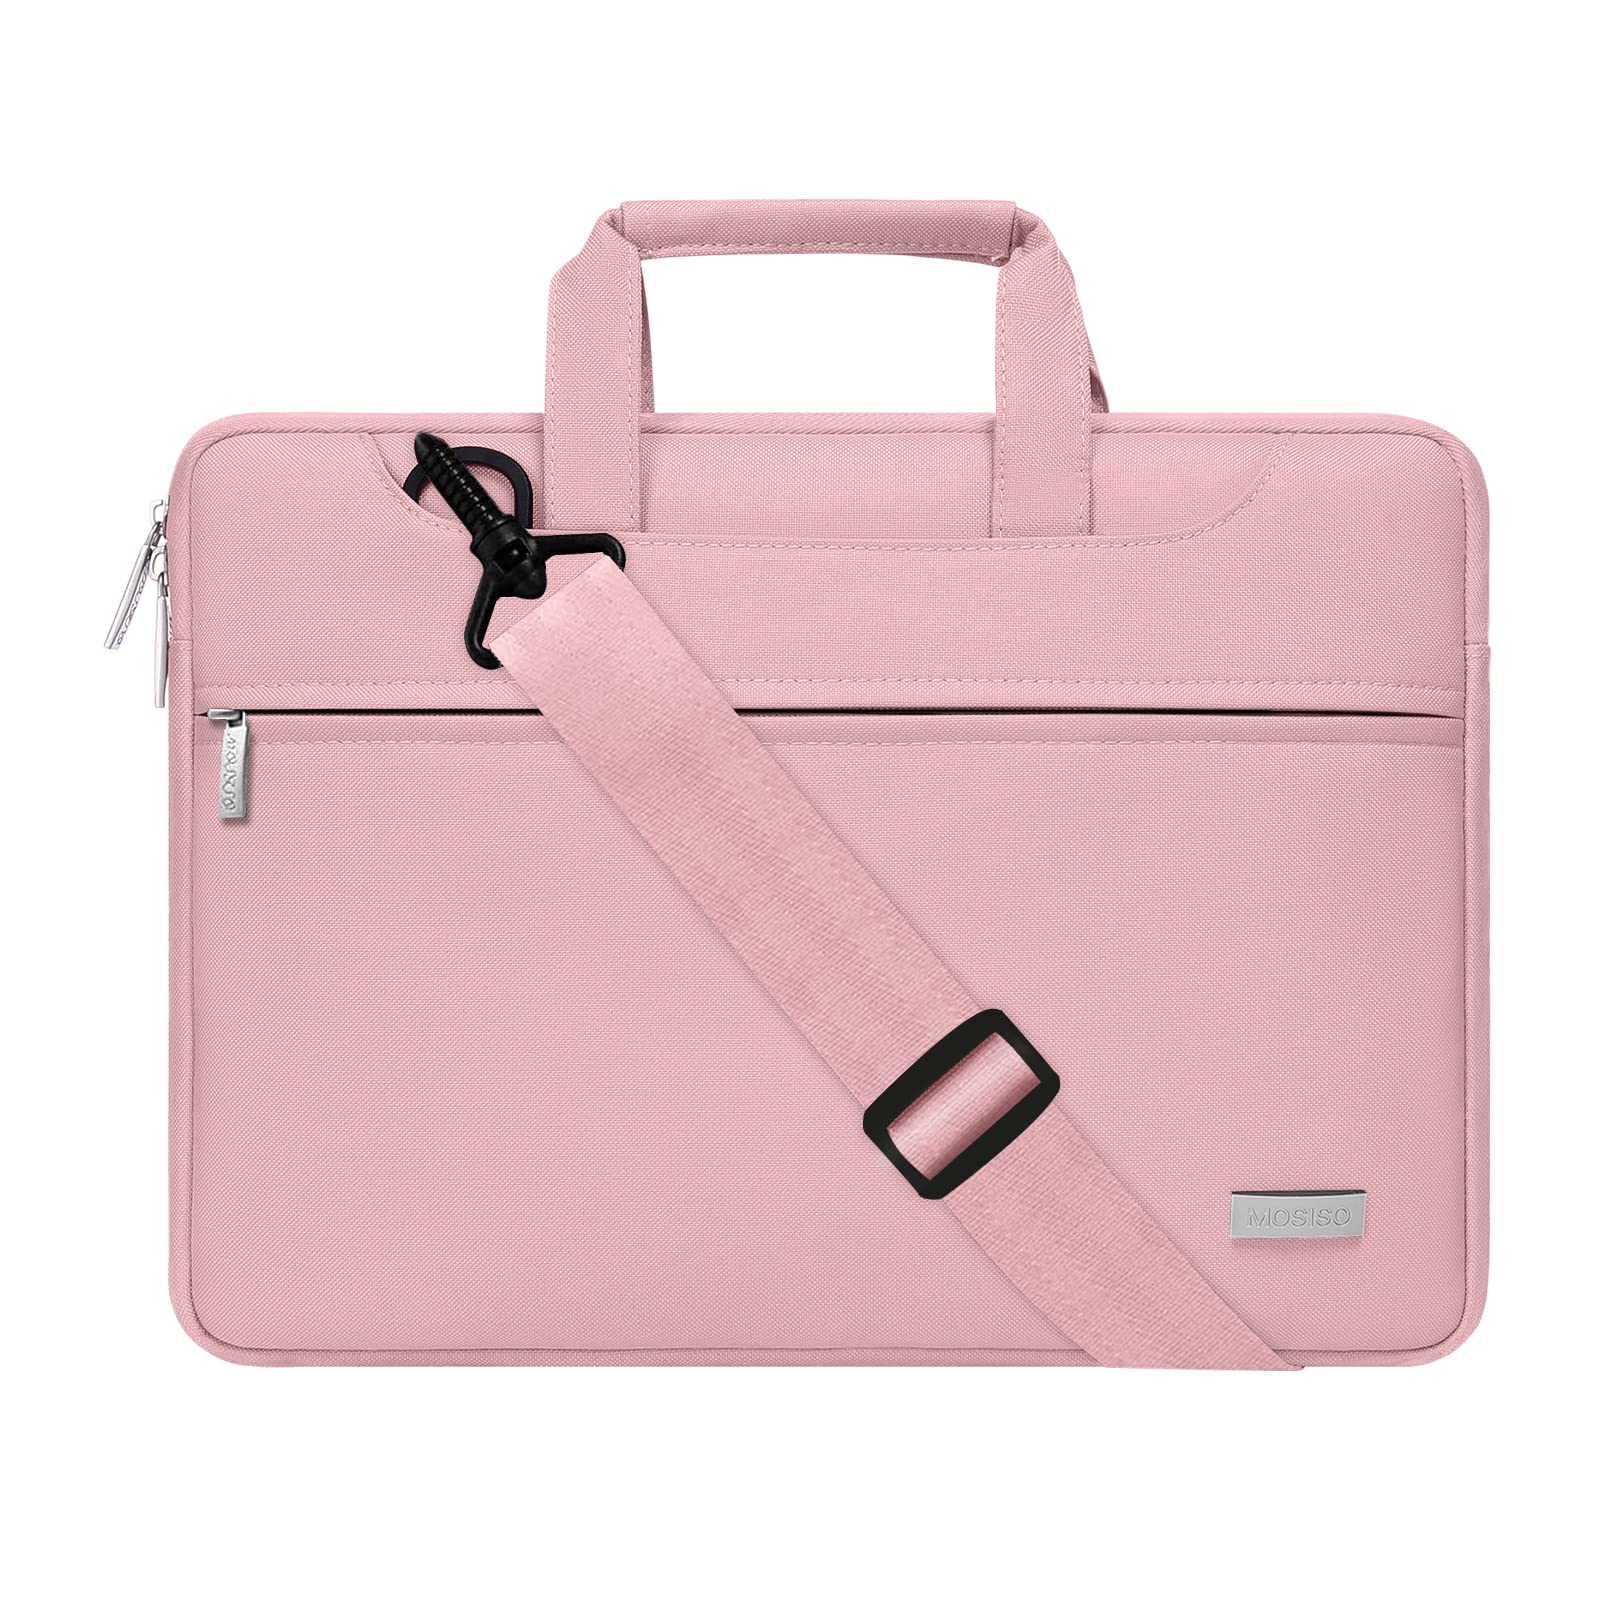 Pink 14 Inch Laptop Sleeve Bag with Carry Handles